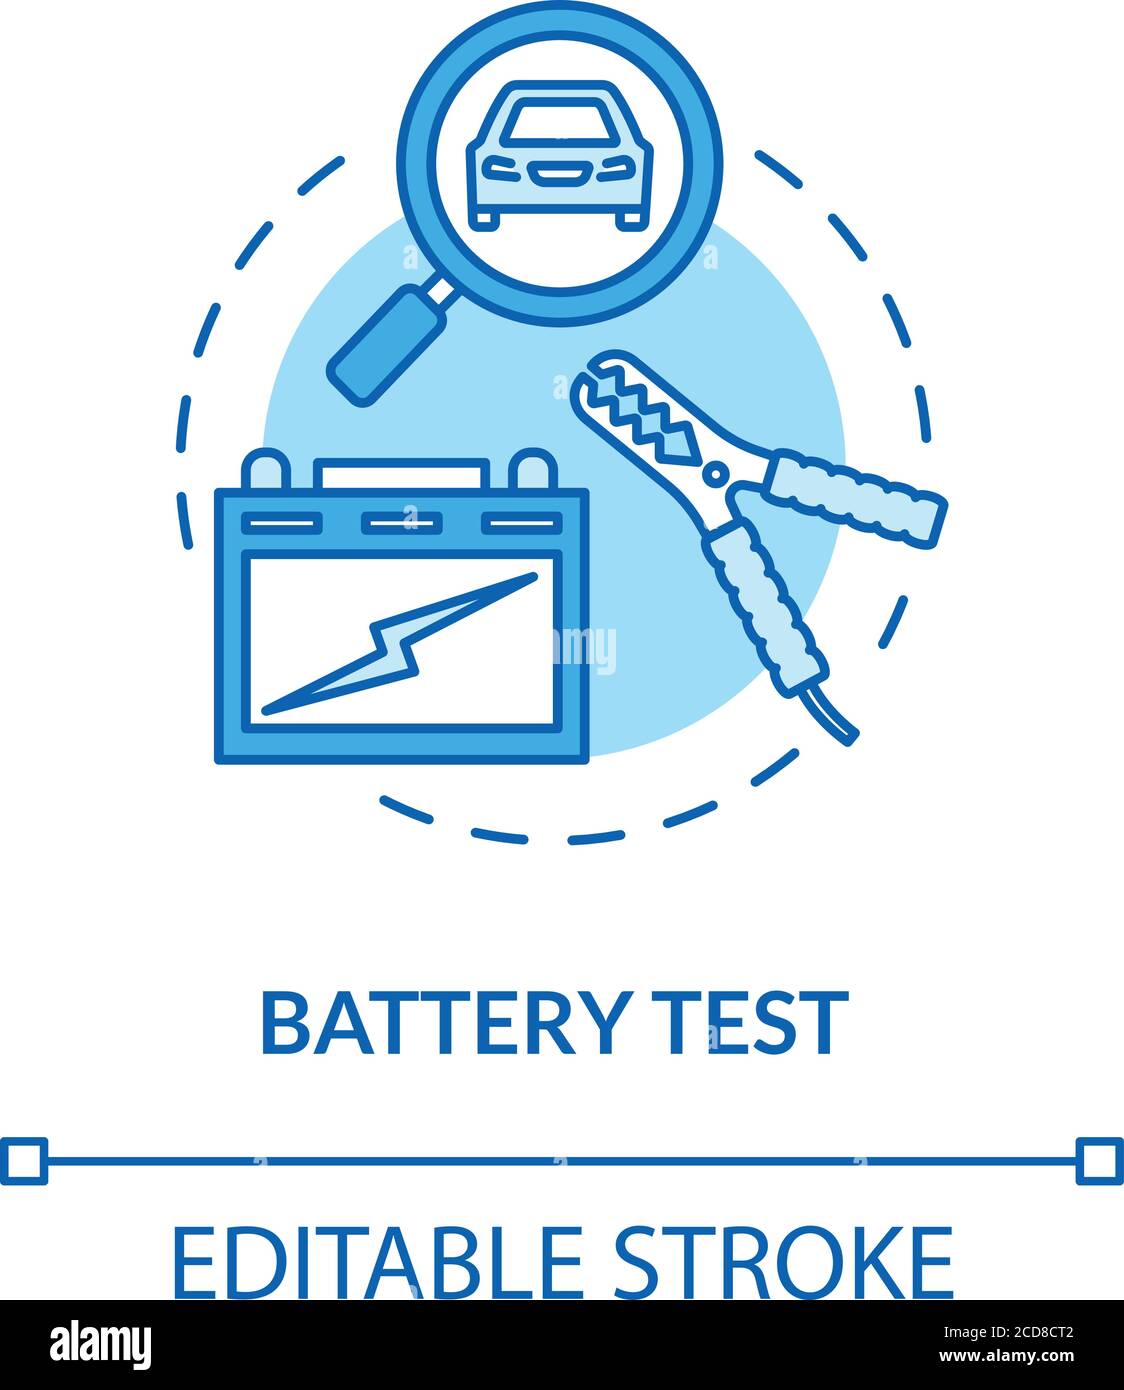 Battery test concept icon Stock Vector